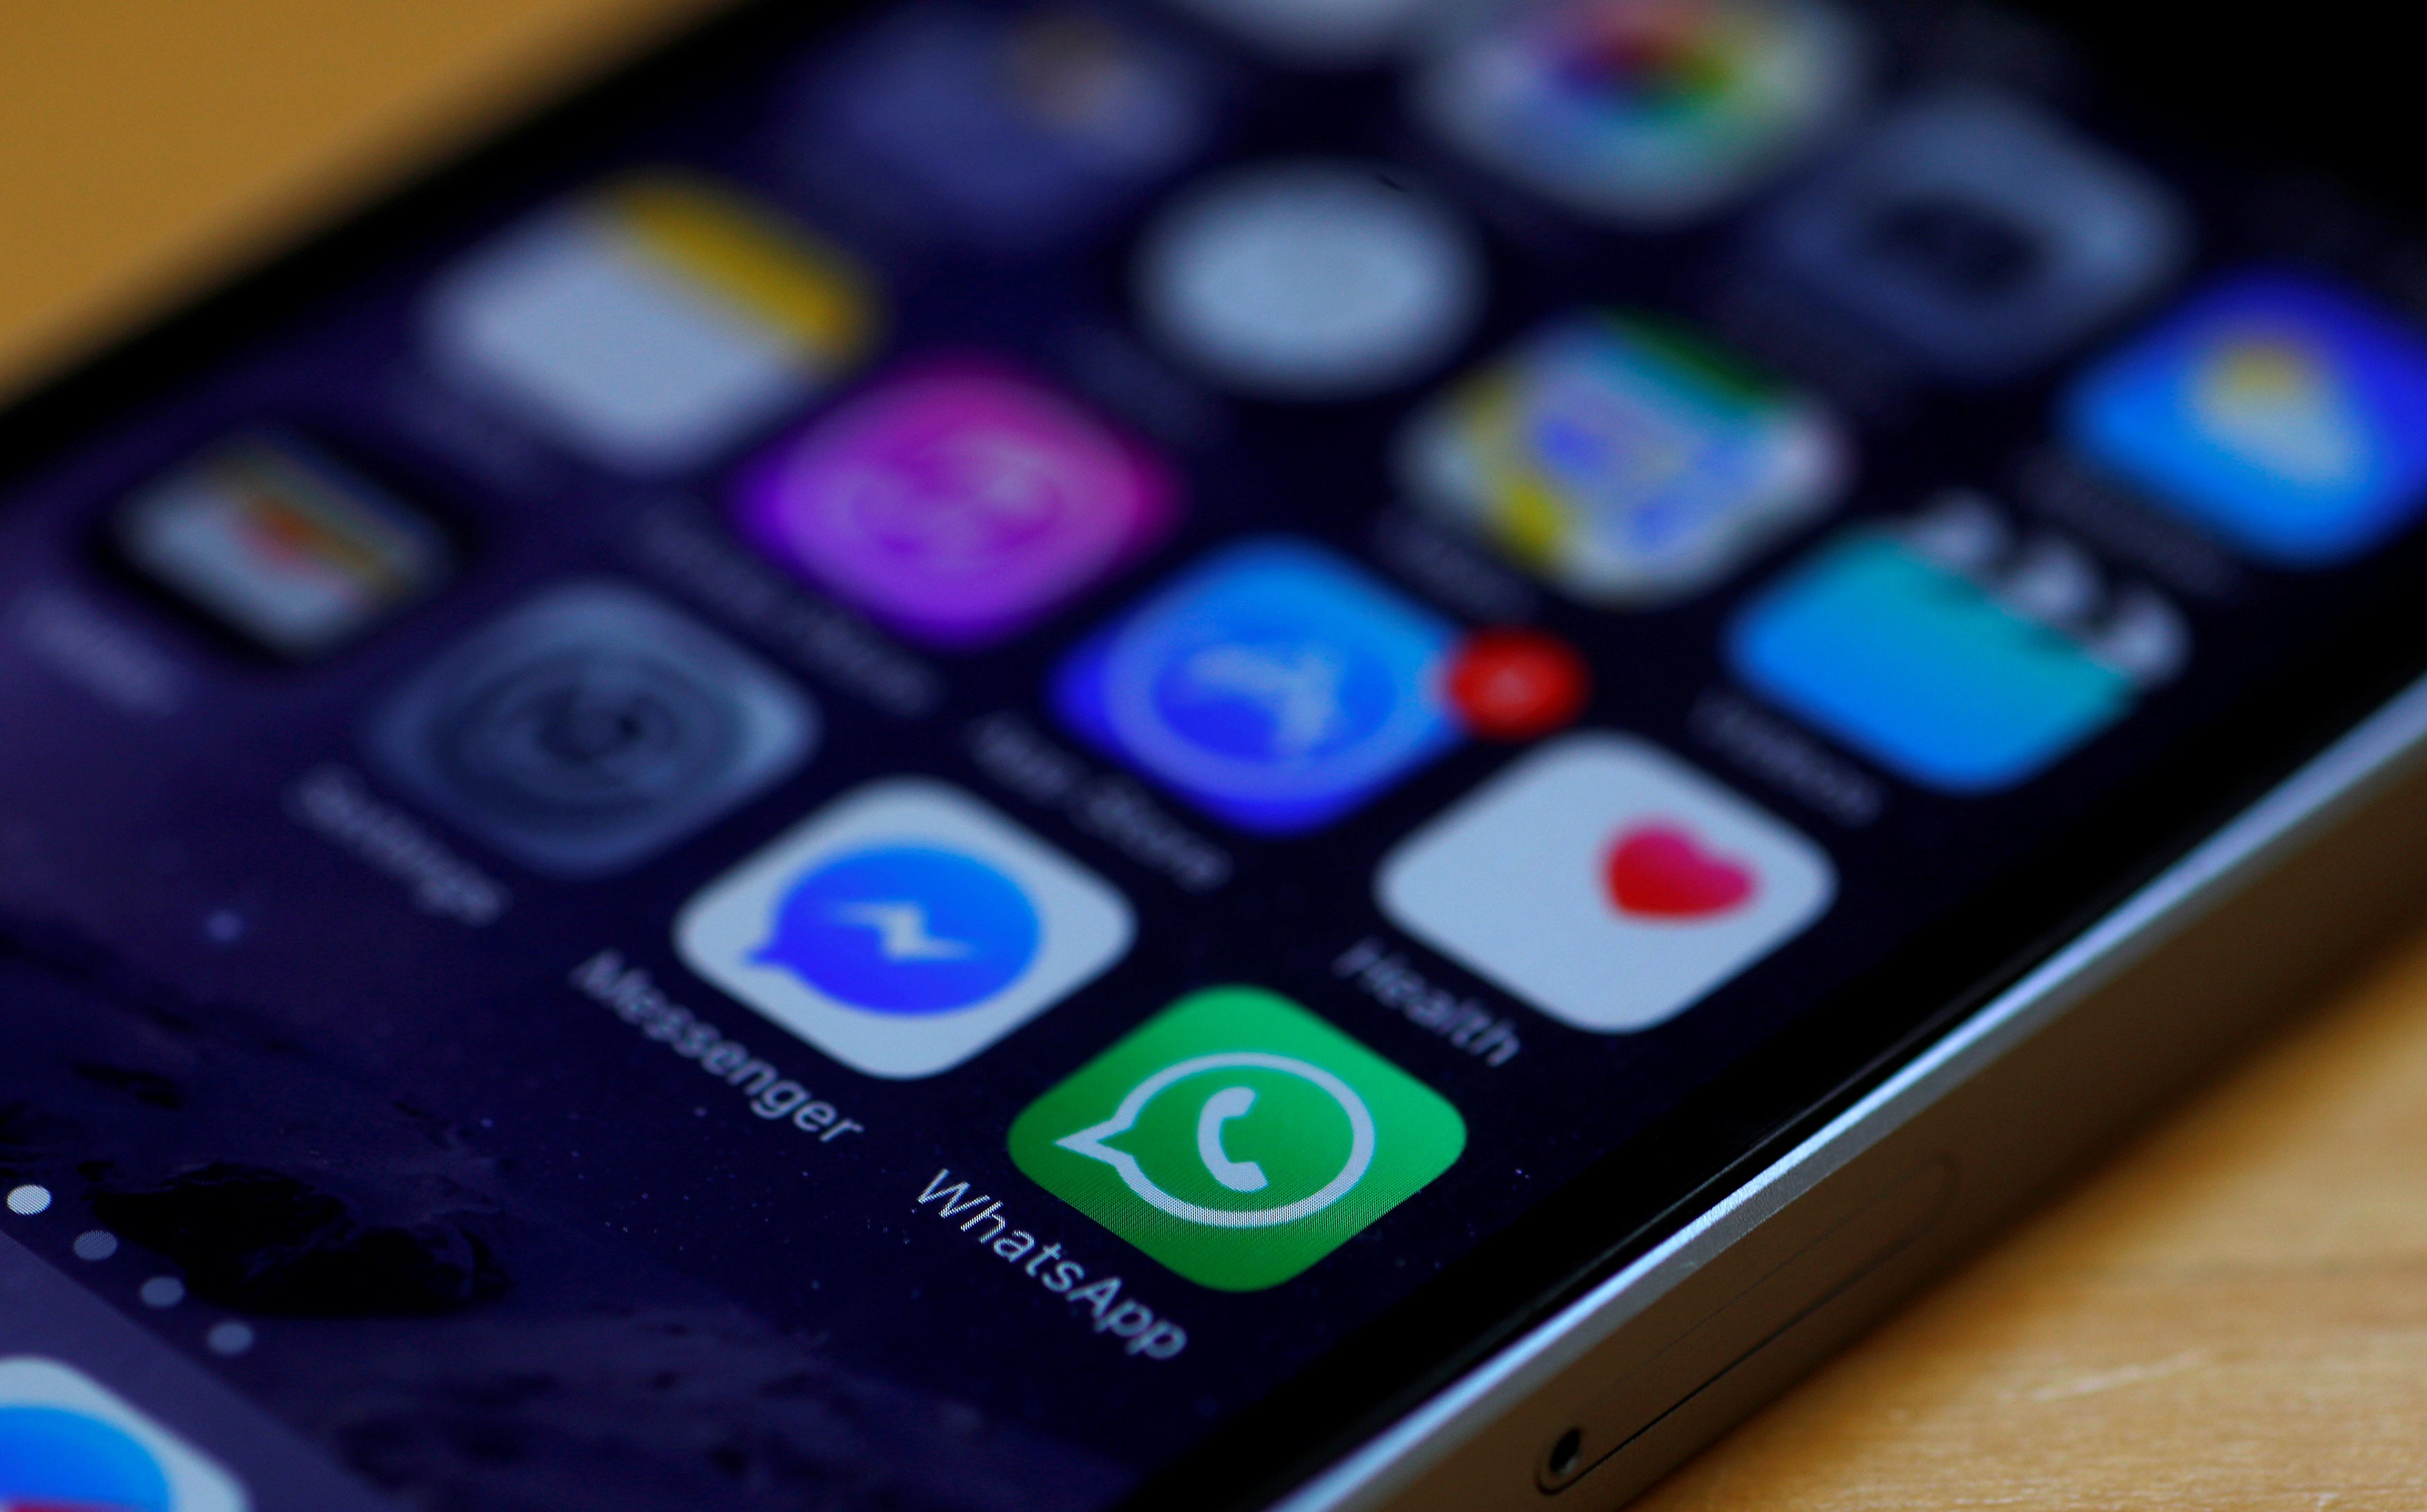 Whatsapp for publishers: How Reach is driving millions of page views via messaging app